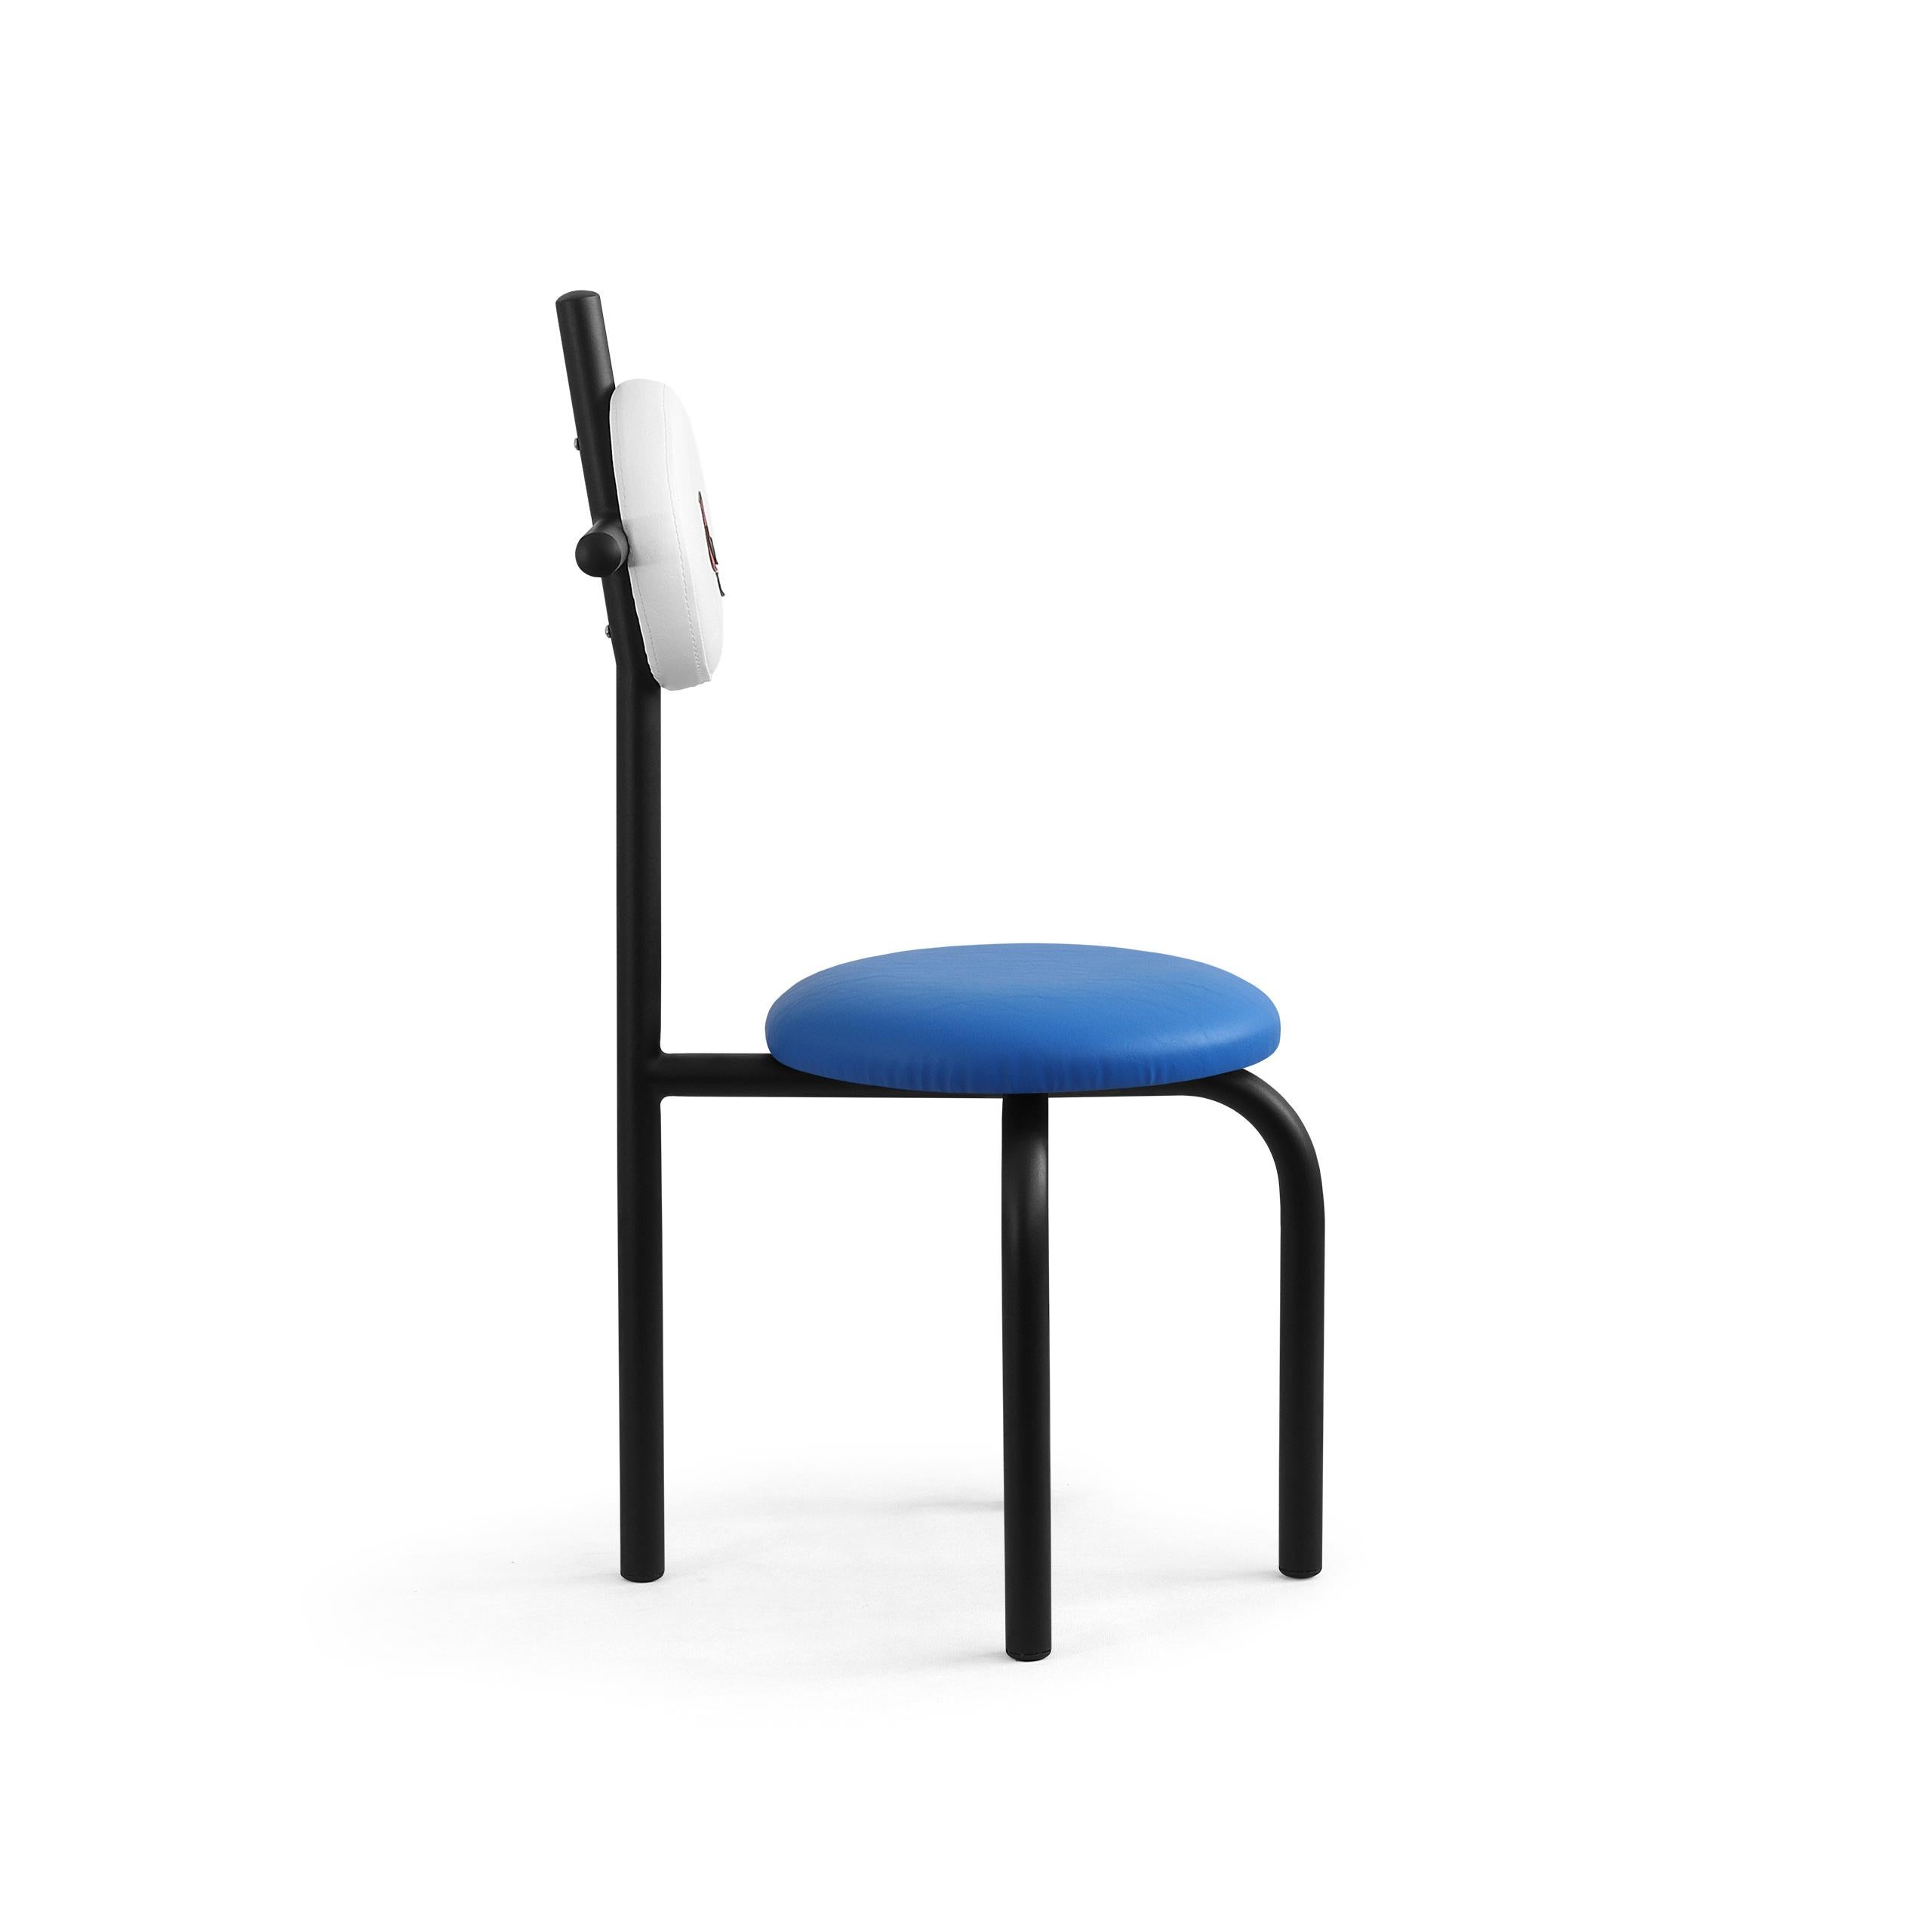 Brazilian PK16 Impermeable Chair, Blue Seat & Carbon Steel Structure by Paulo Kobylka For Sale